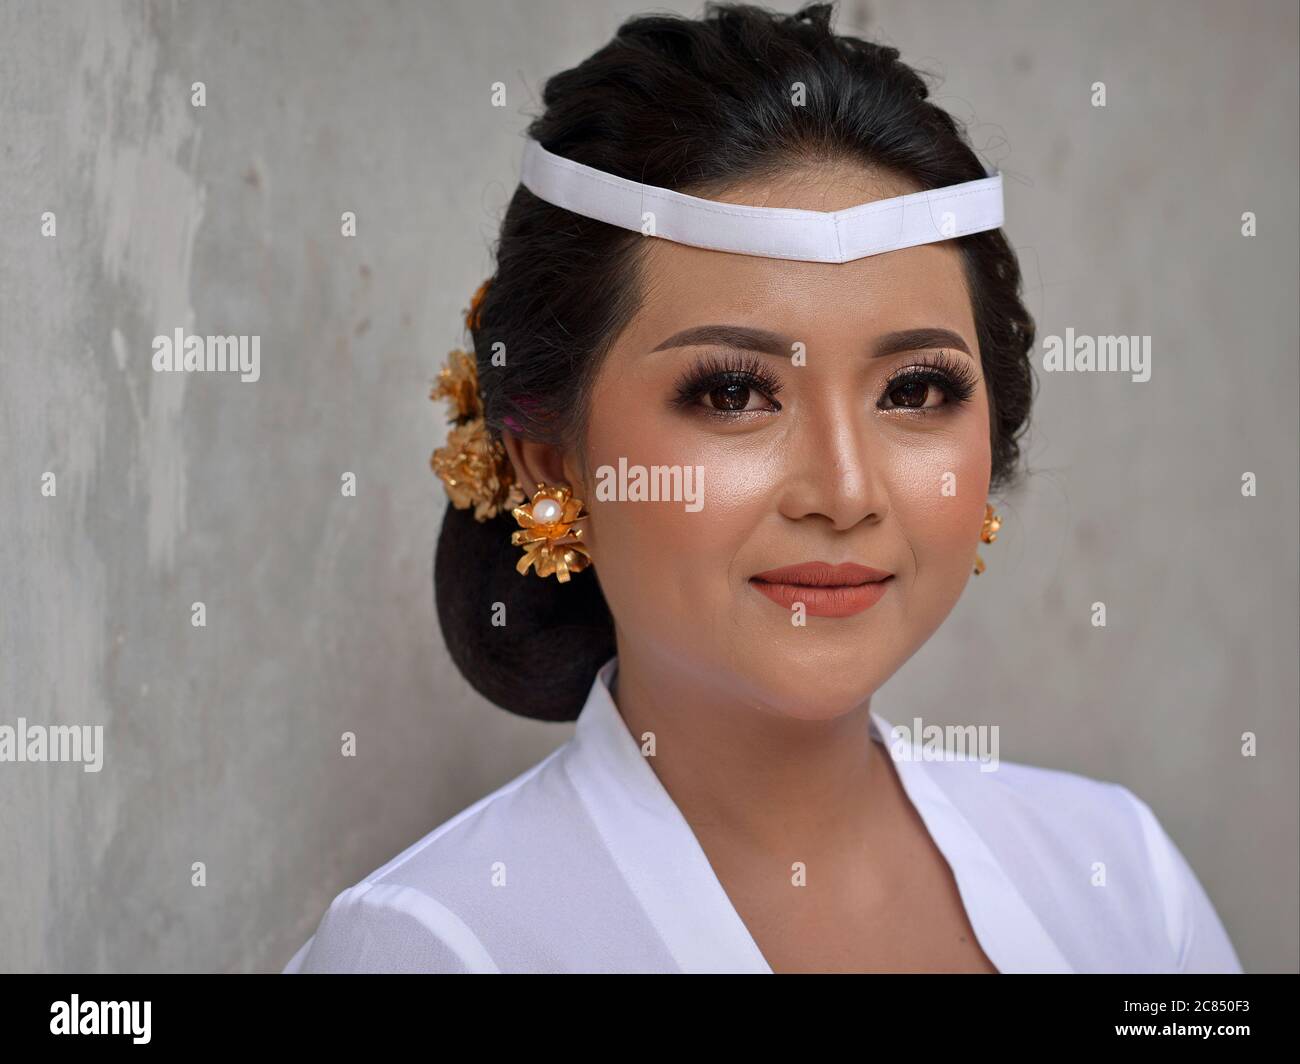 Beautiful Indonesian Balinese woman wears white outfit and poses for the camera during a religious Hindu temple ceremony (Odalan festival). Stock Photo